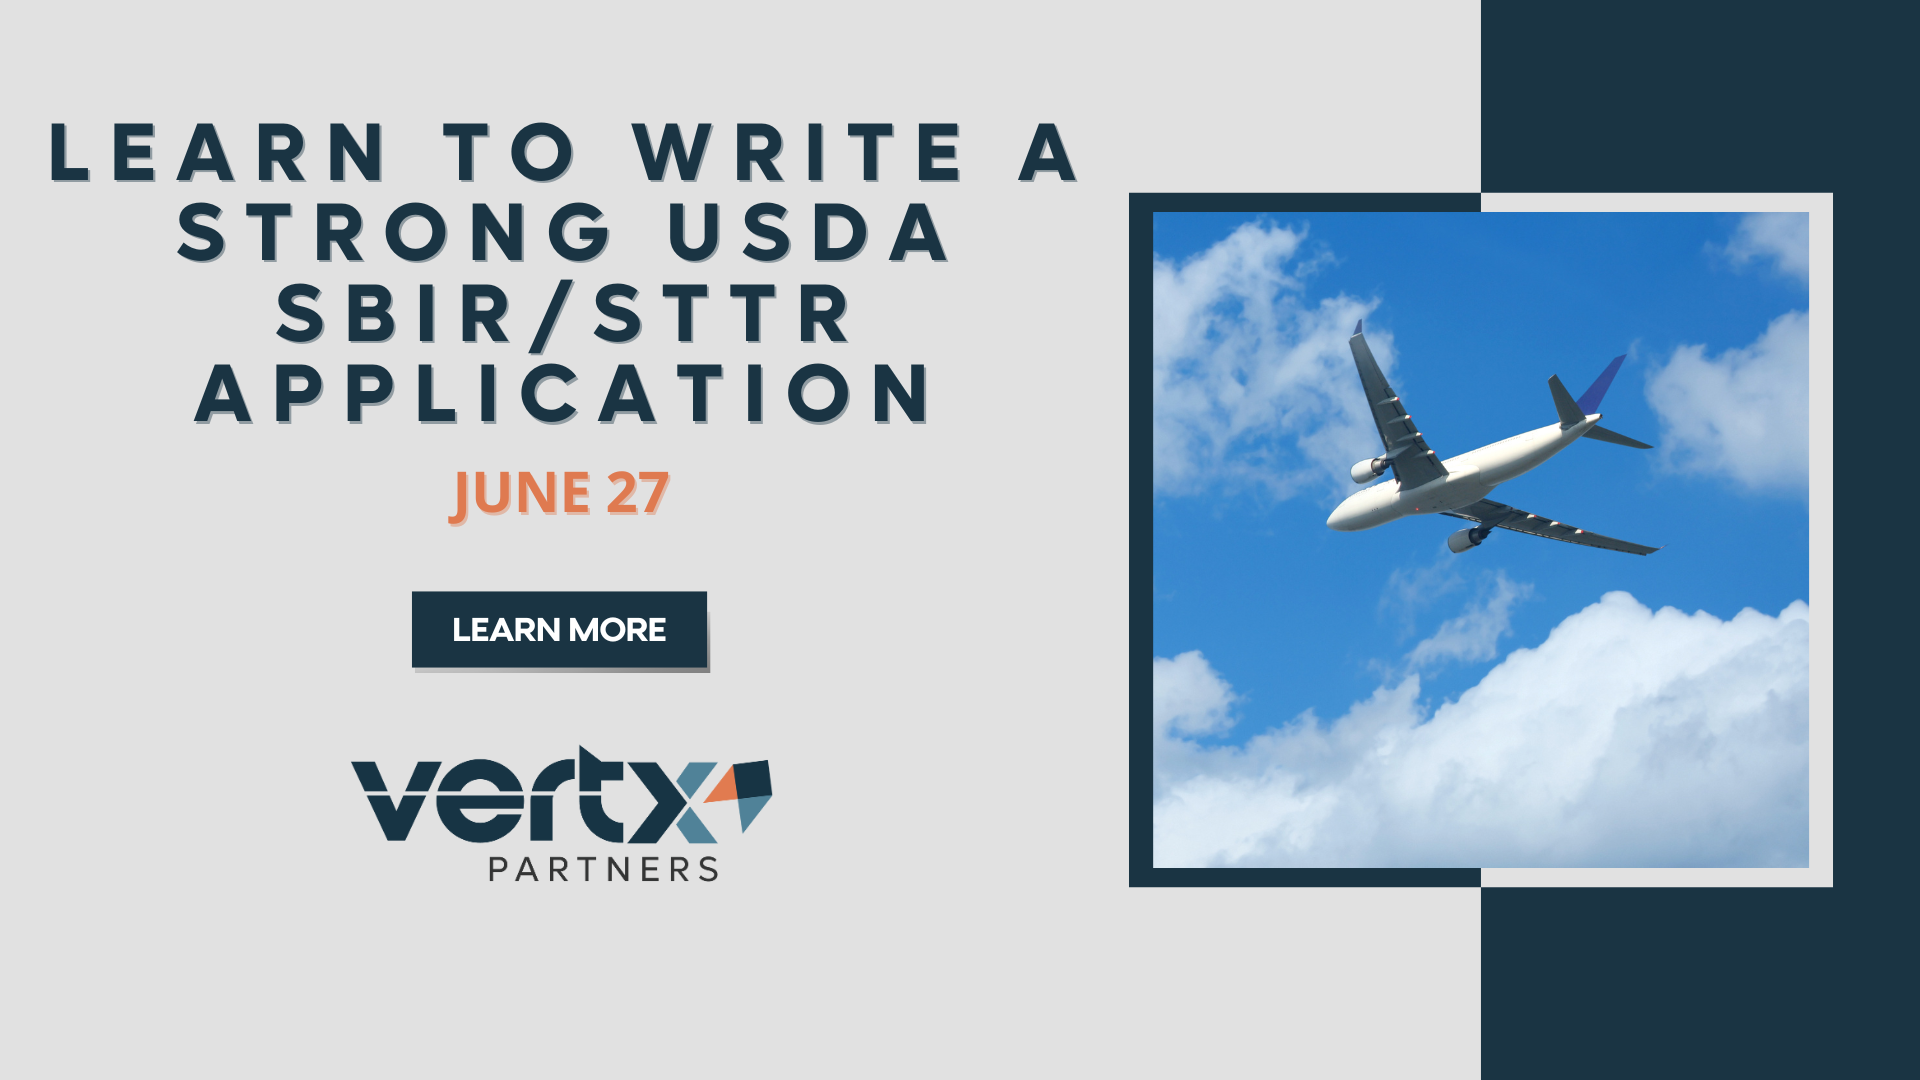 This graphic has the title Learn to Write a Strong USDA SBIR/STTR Application with the date June 27th under it and a photo of a plane in a blue sky to the right of it.